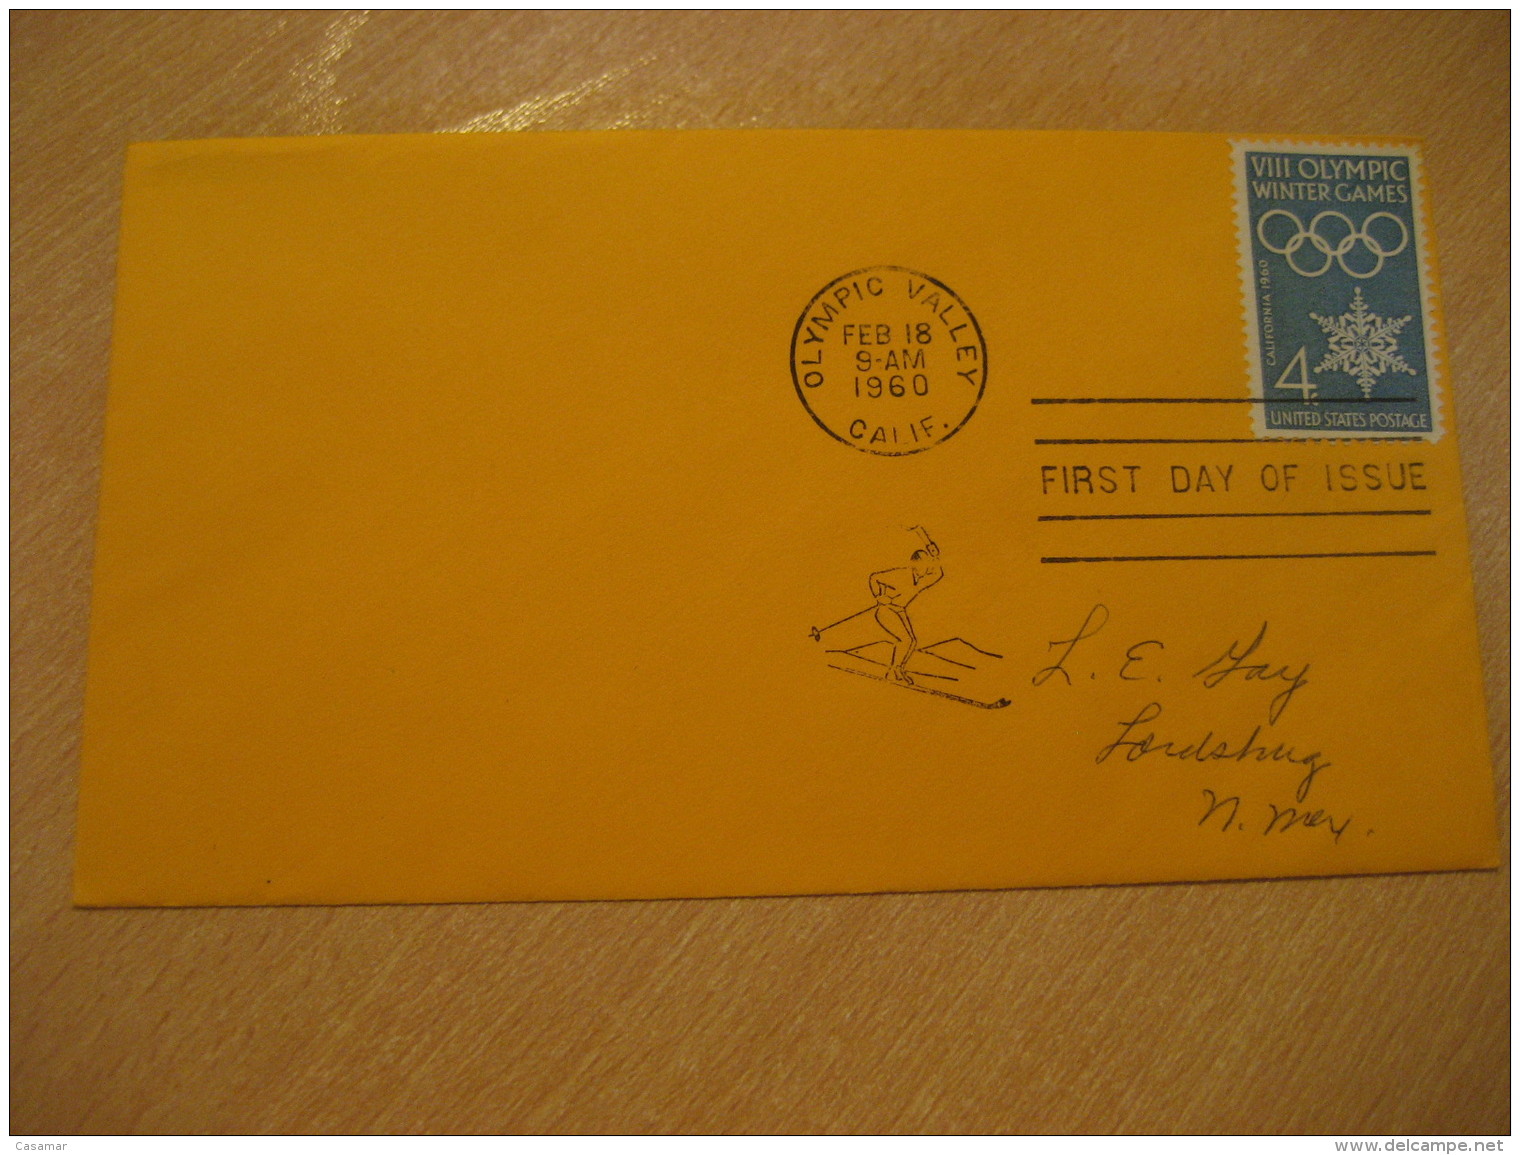 SQUAW VALLEY 1960 Winter Olympic Games Olympics OLYMPIC VALLEY 1960 FDC Cancel Cover USA - Hiver 1960: Squaw Valley